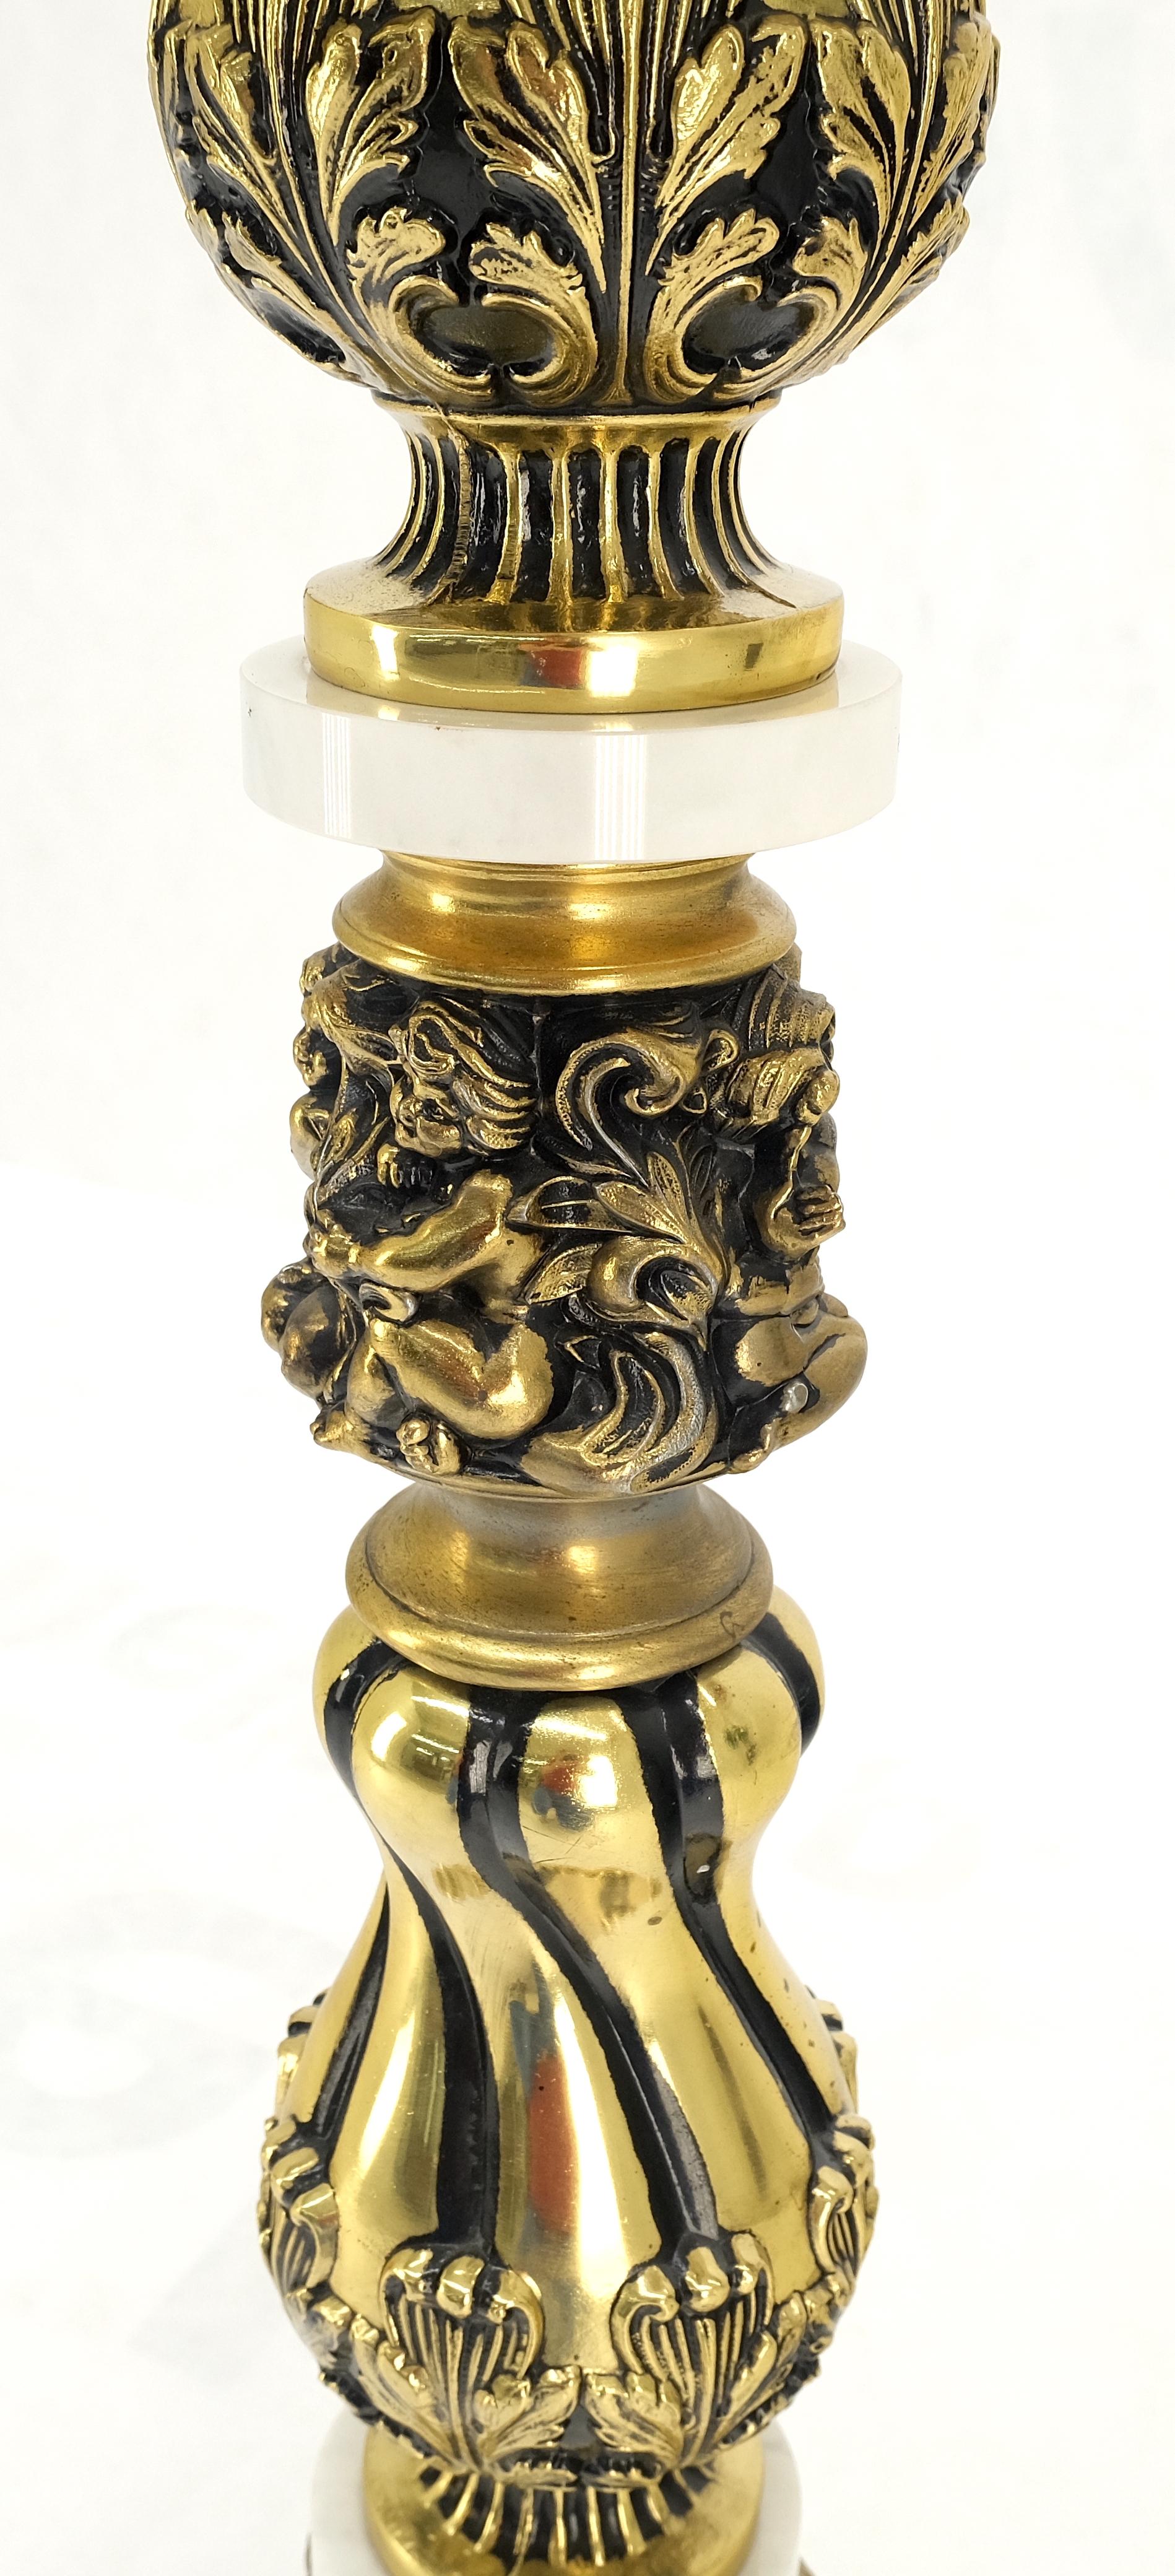 American Brass & Marble Decorative Ornate Round Pedestal Stand Mint! For Sale